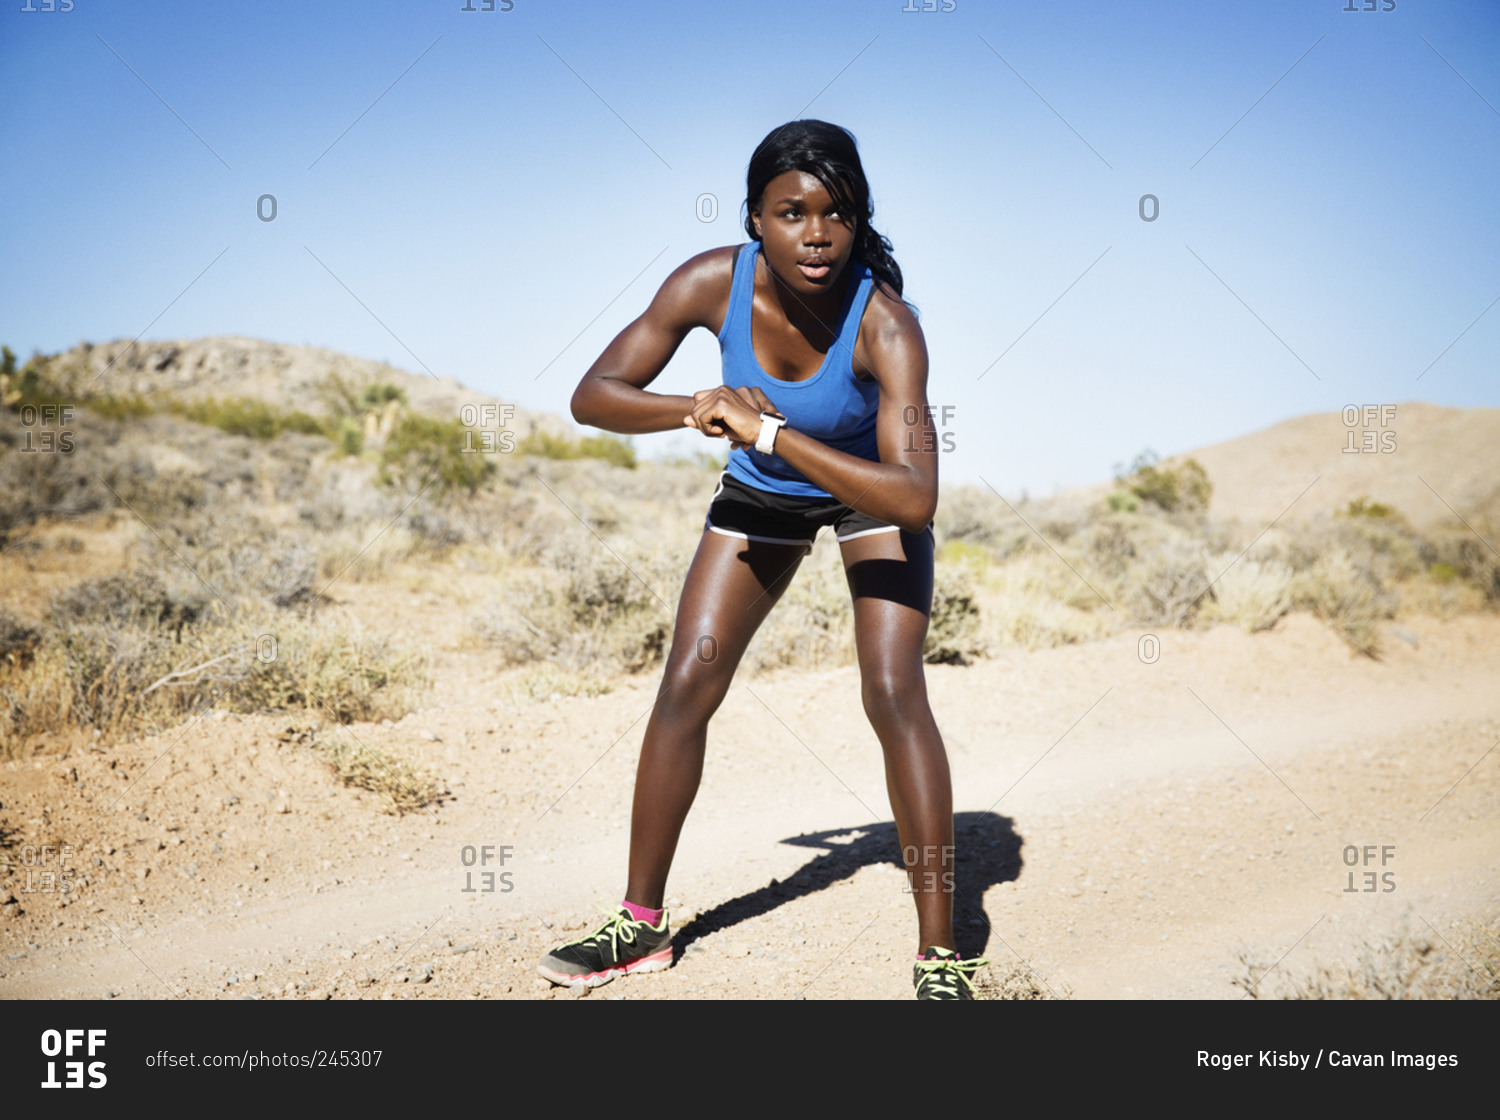 Athletic woman in remote setting ready for a run